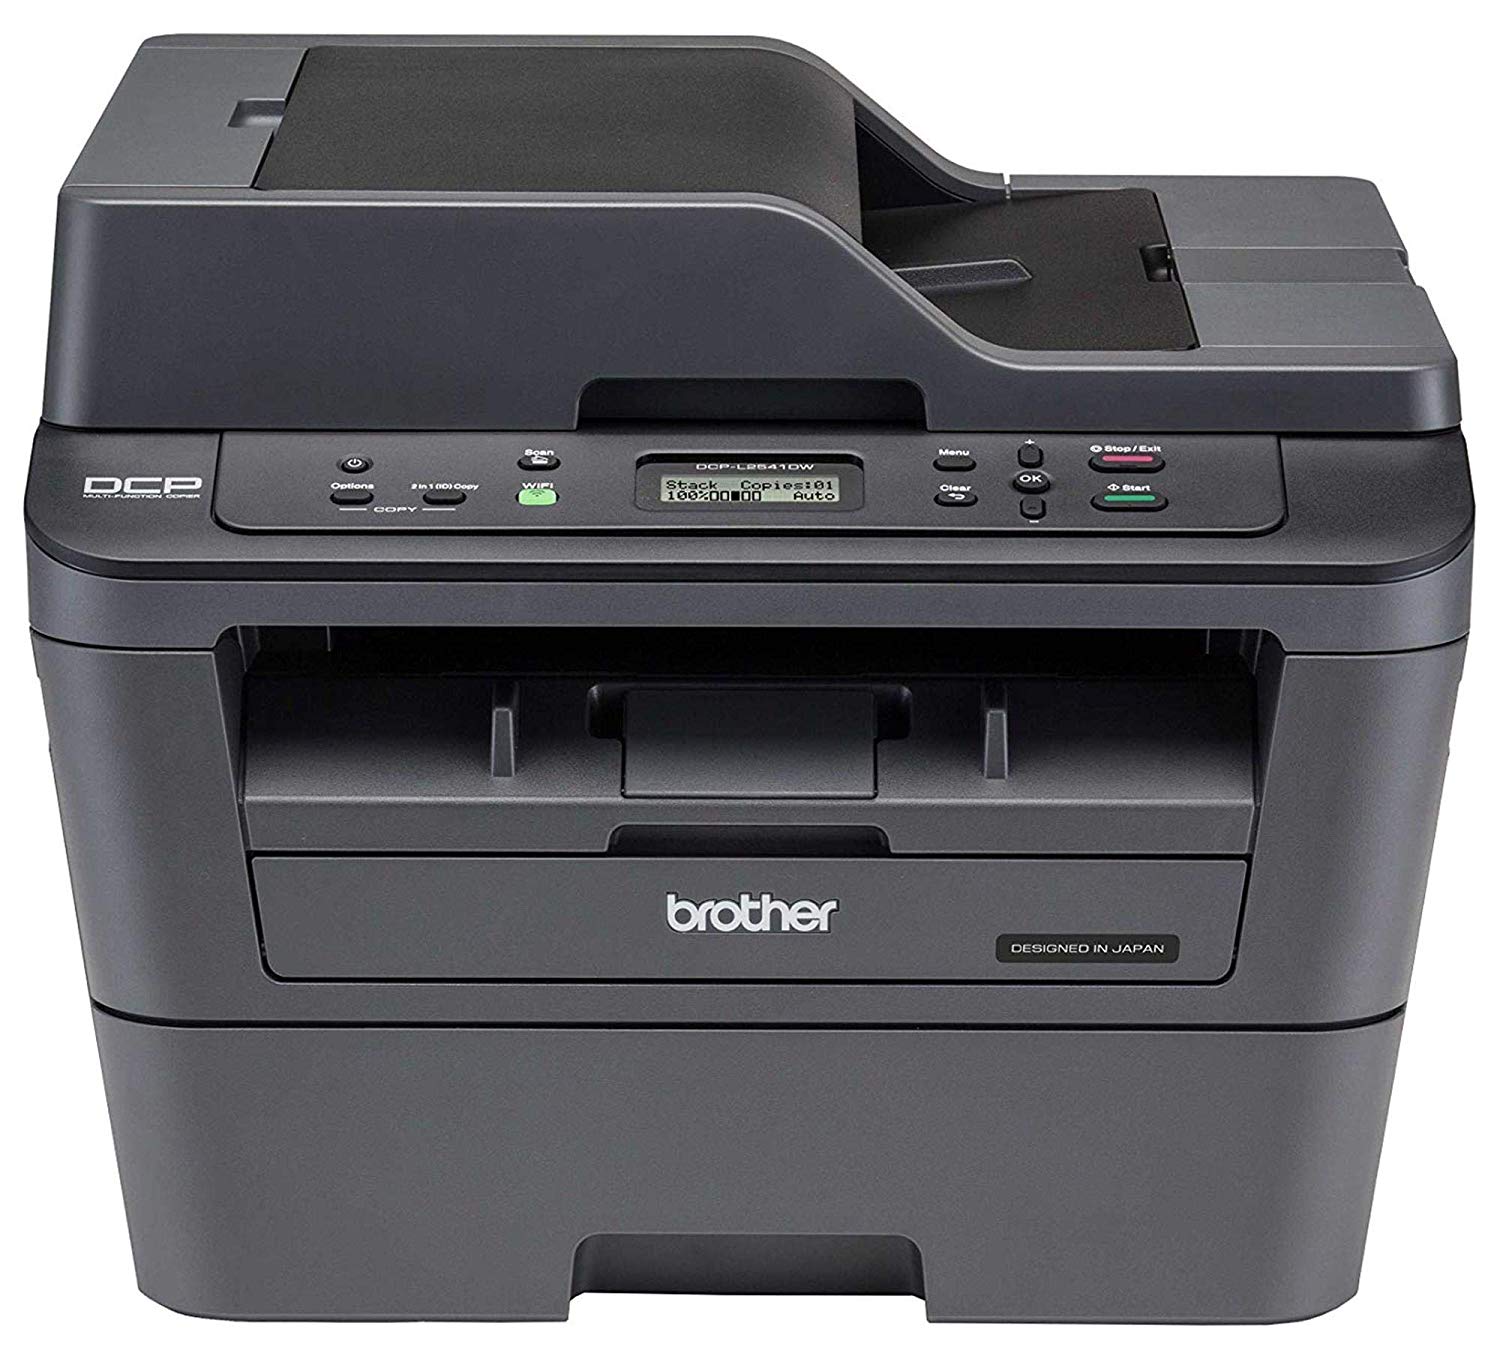 Brother Monocrom Laser Multi-Function Printer DCP-L2541DW Print, Scan, Copy, Duplex, 30 PPM, 32 MB Memory, 35 Sheets ADF, Wi-Fi & Wired Network, Wi-Fi Direct